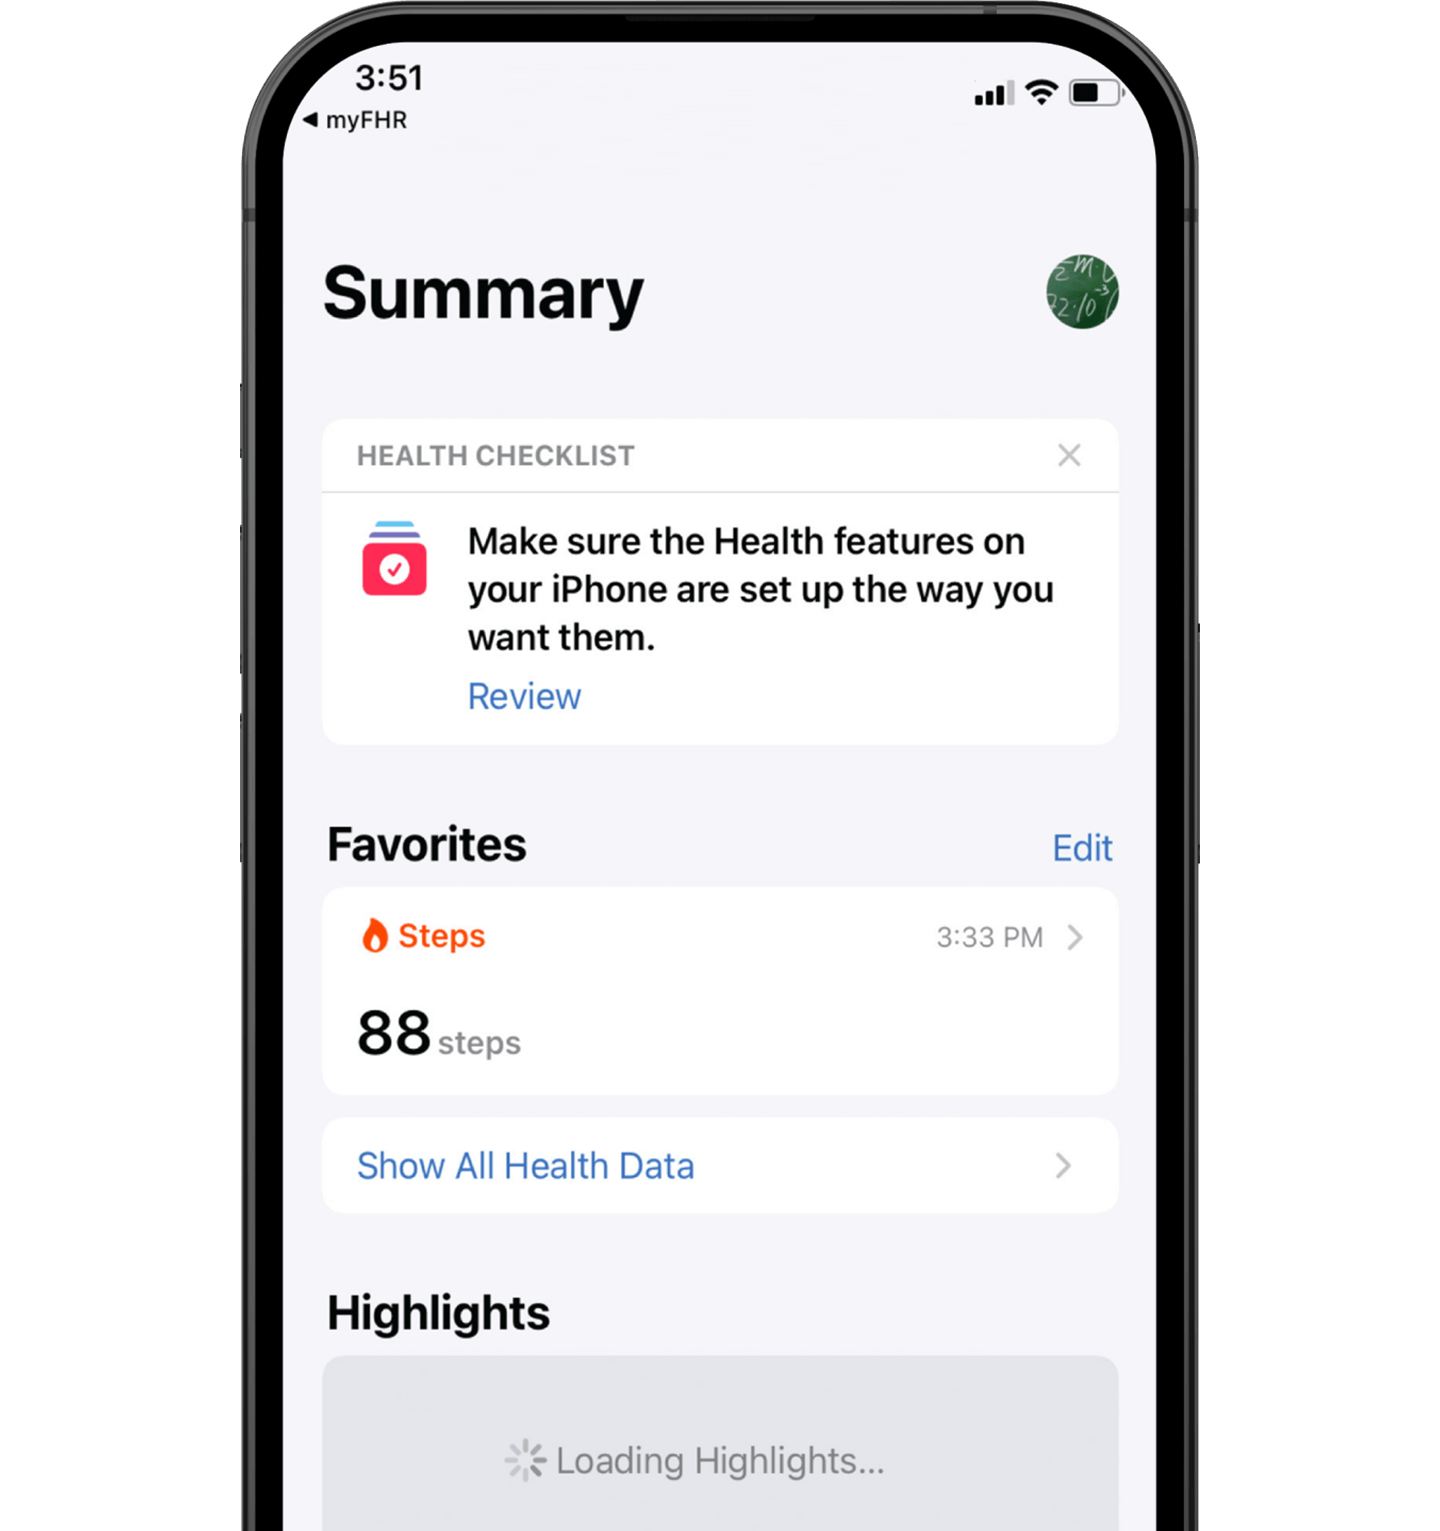 A phone showing an app screen from myFHR. It shows a health checklist with a message: Make sure the Health features on your iPhone are set up the way you want them. It also shows the user's favorite data and highlights